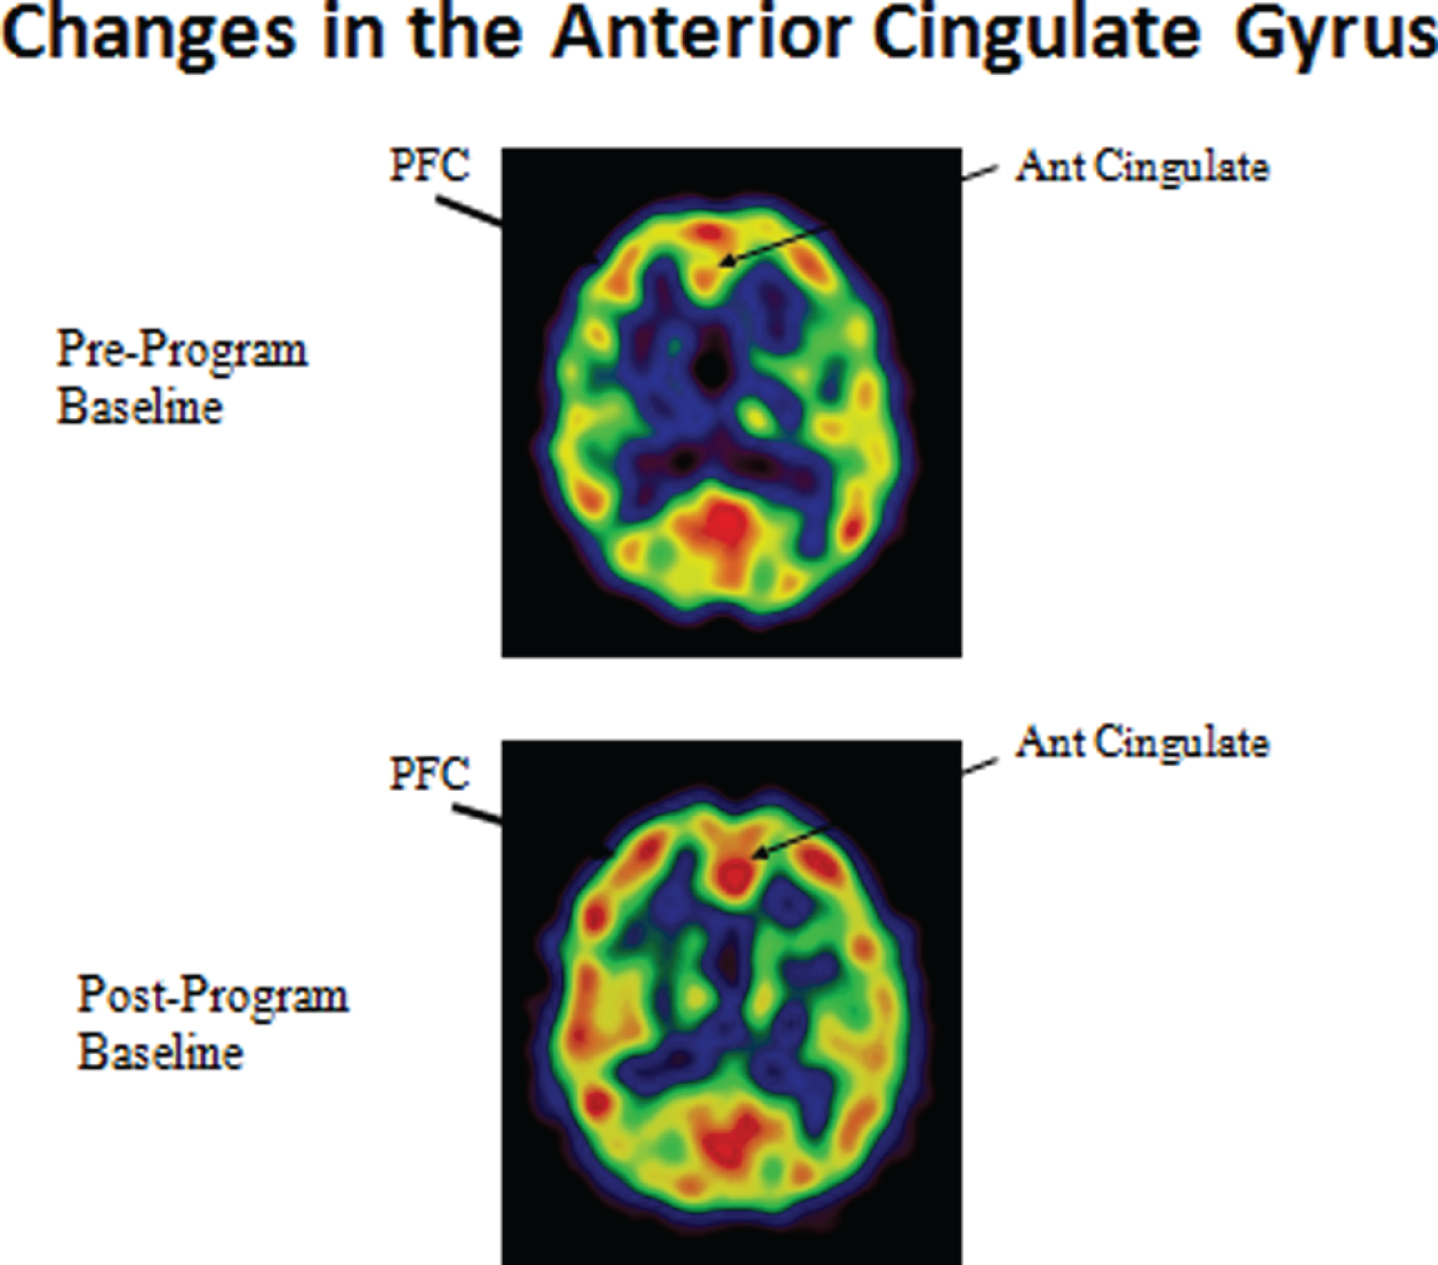 Enhanced cerebral blood flow in the prefrontal cortex and anterior cingulate gyrus.